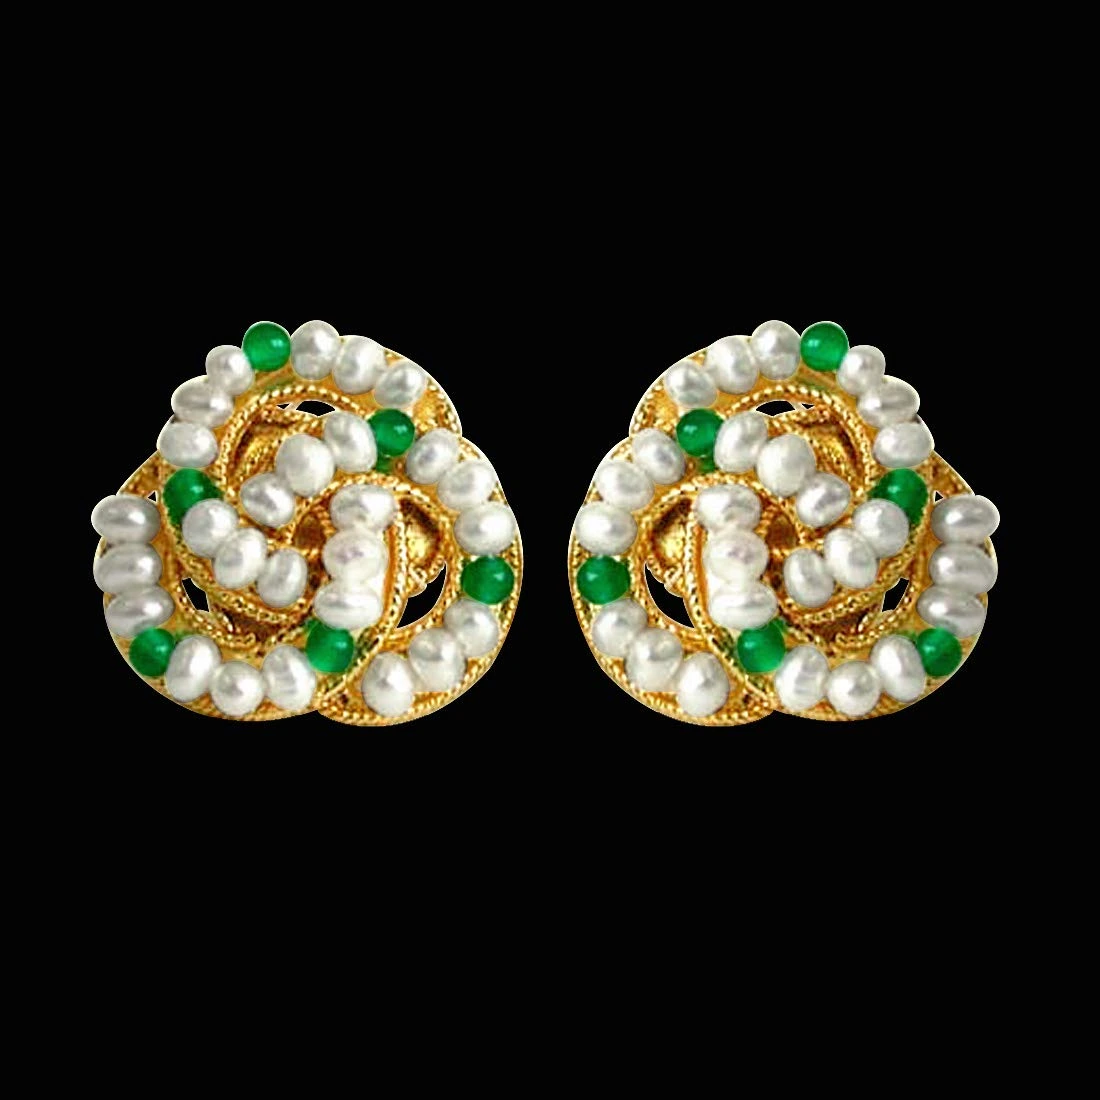 Green Fairy Queen - Real Freshwater Pearl, Green Onyx & Gold Plated Stud Earrings for Women (SE45)